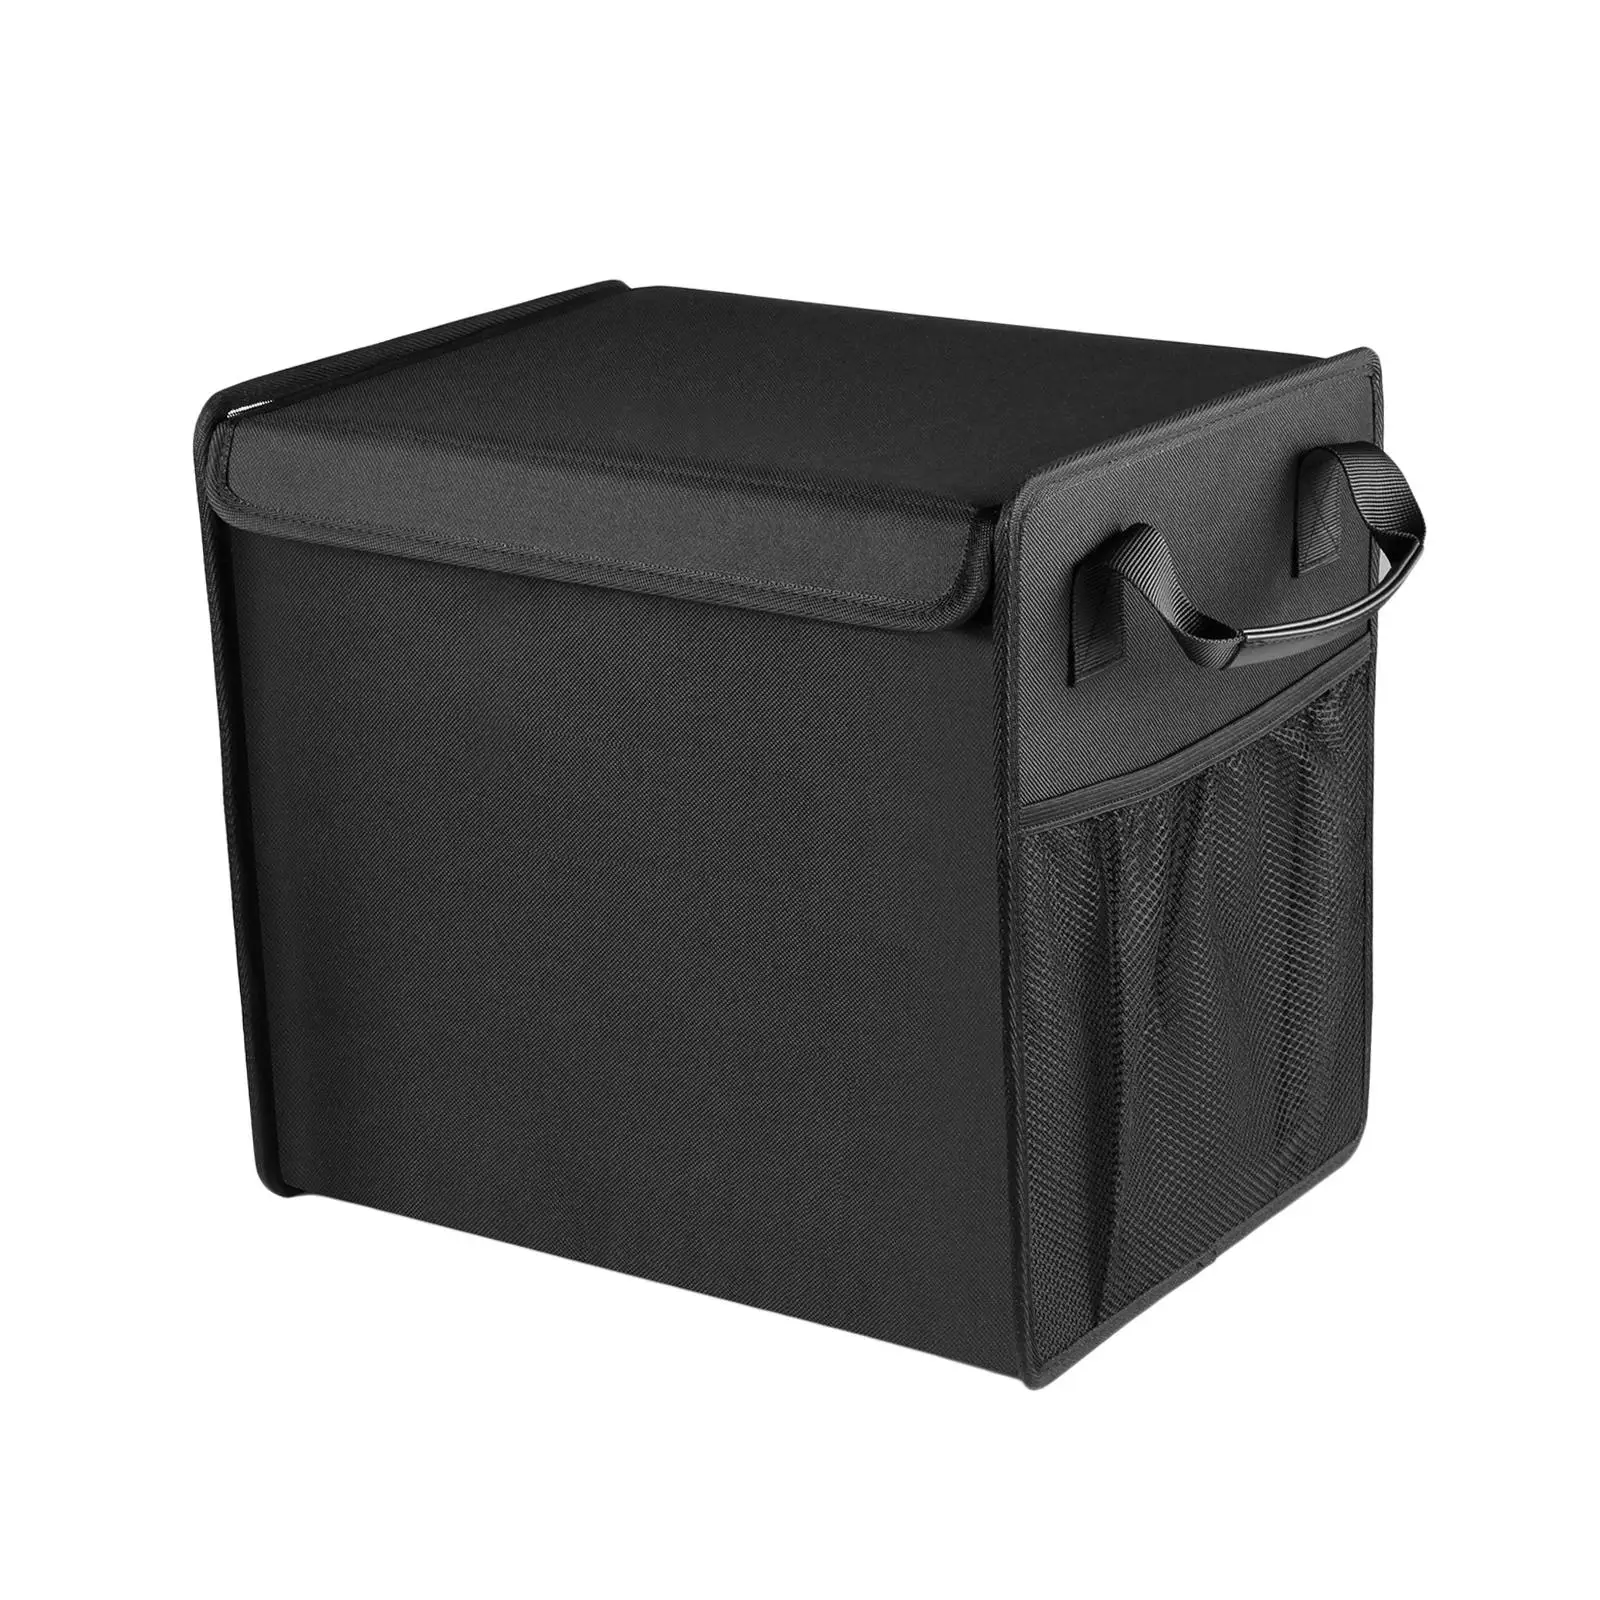 Car Trunk Organizer Bag Storage Trunk Folding Multi Function Cargo Storage Container Outdoor Camping Storage Box for SUV